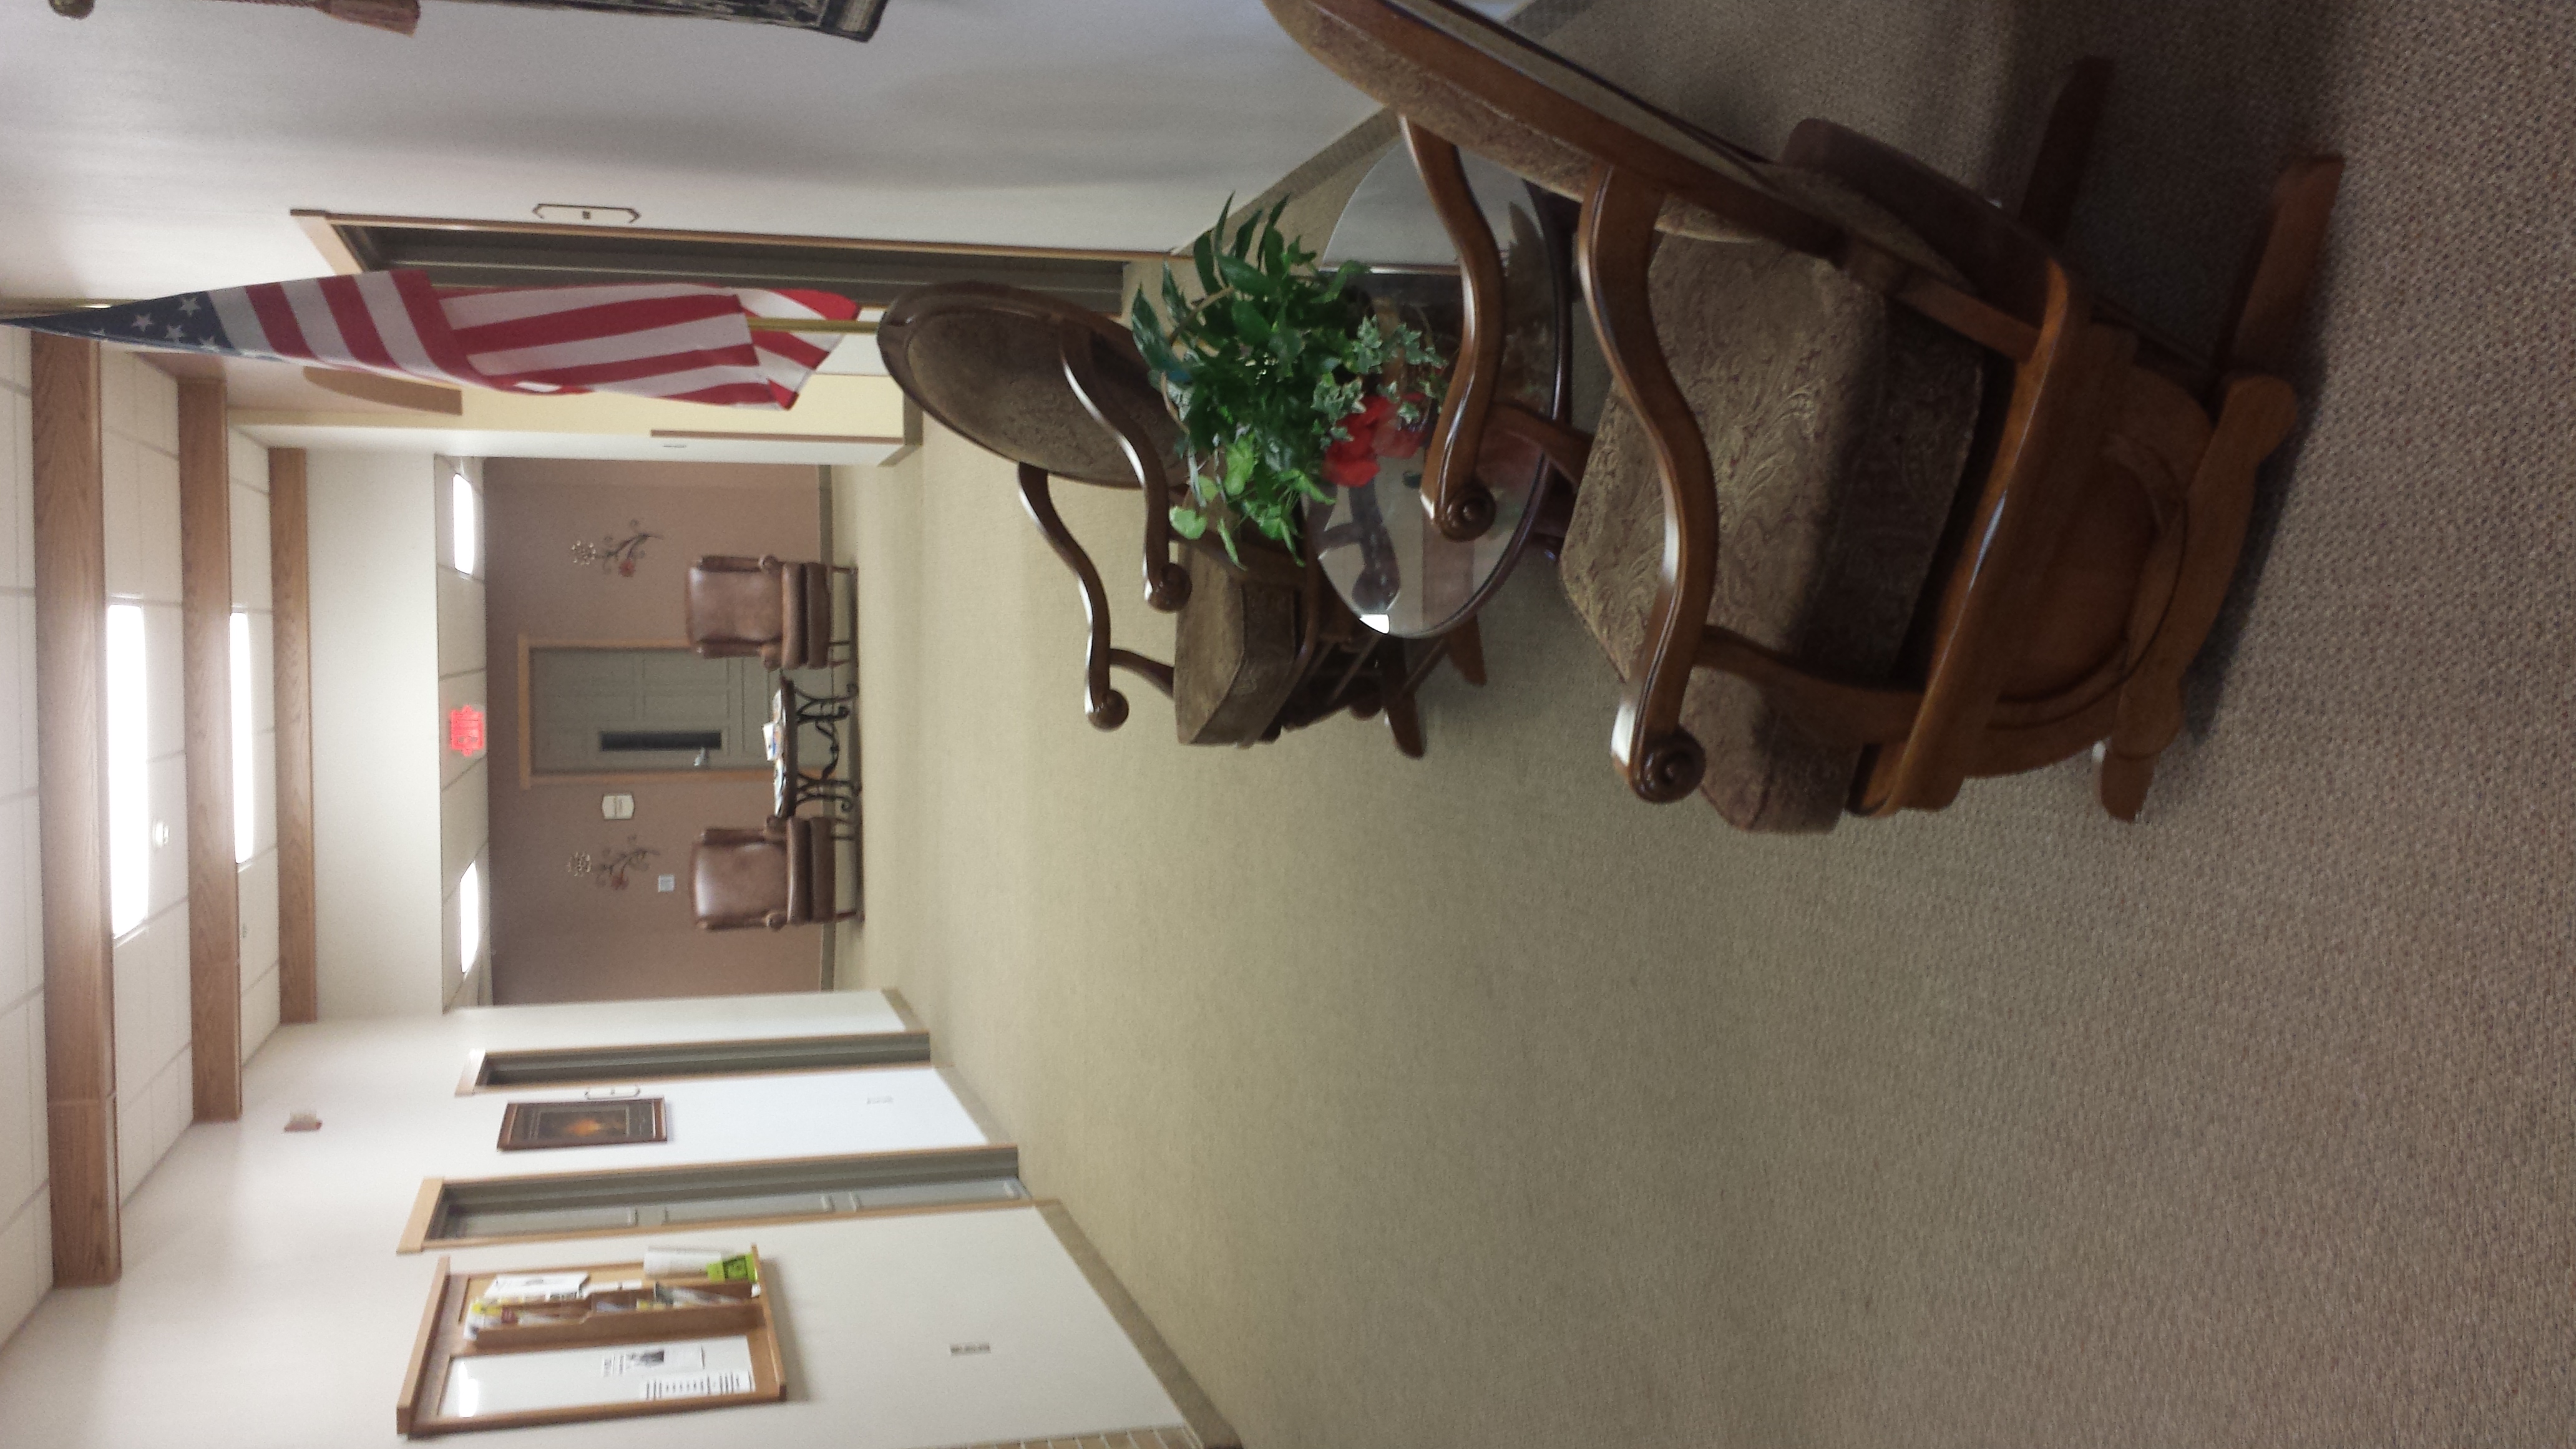 Lakeview Assisted Living hallway